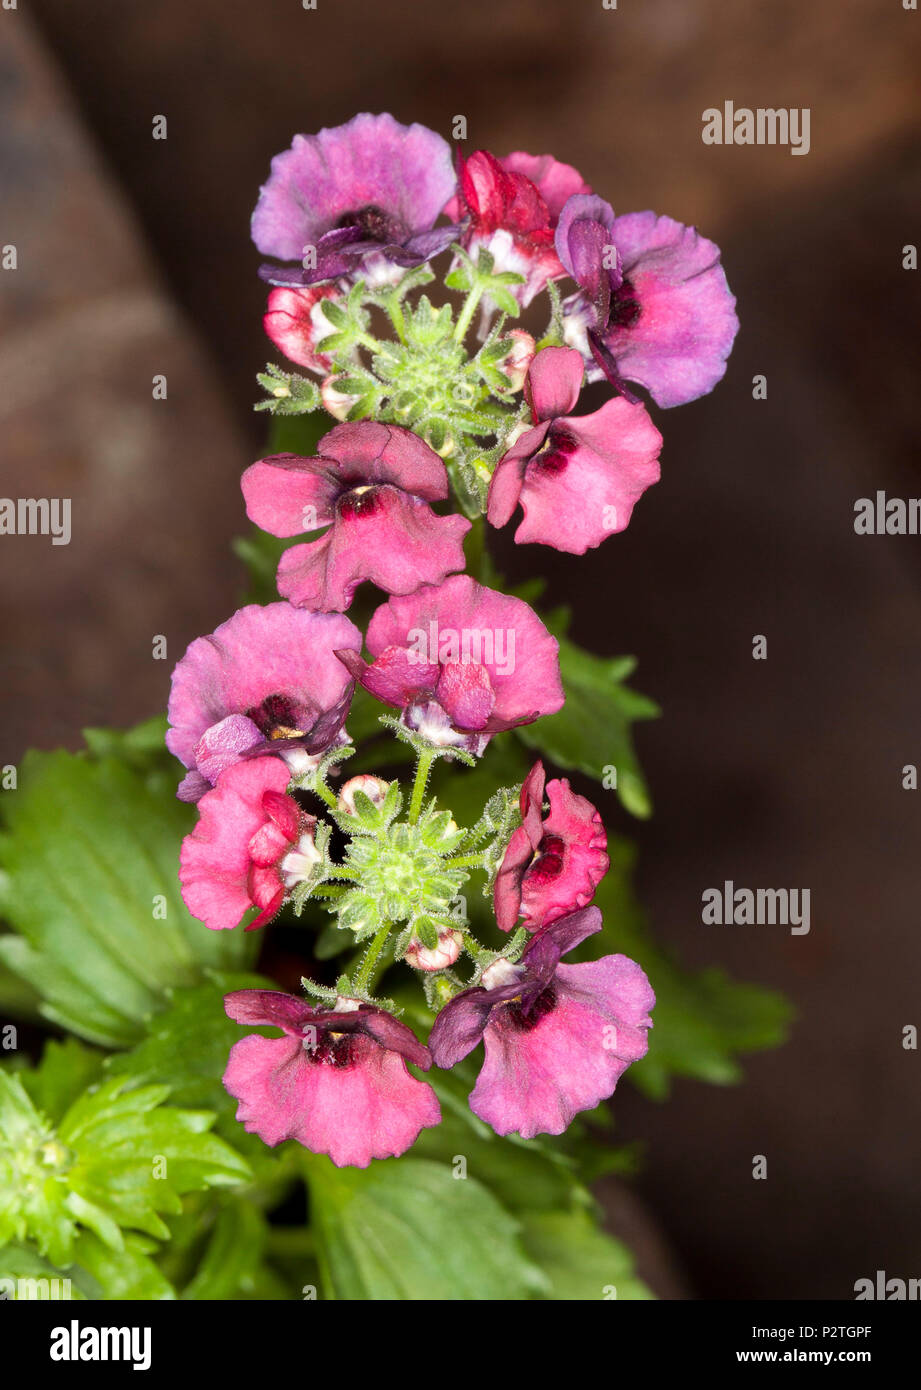 Cluster of vivid pink - red flowers and bright green leaves of garden plant Nemesia fruticans 'Fruit Tingles' on dark background Stock Photo